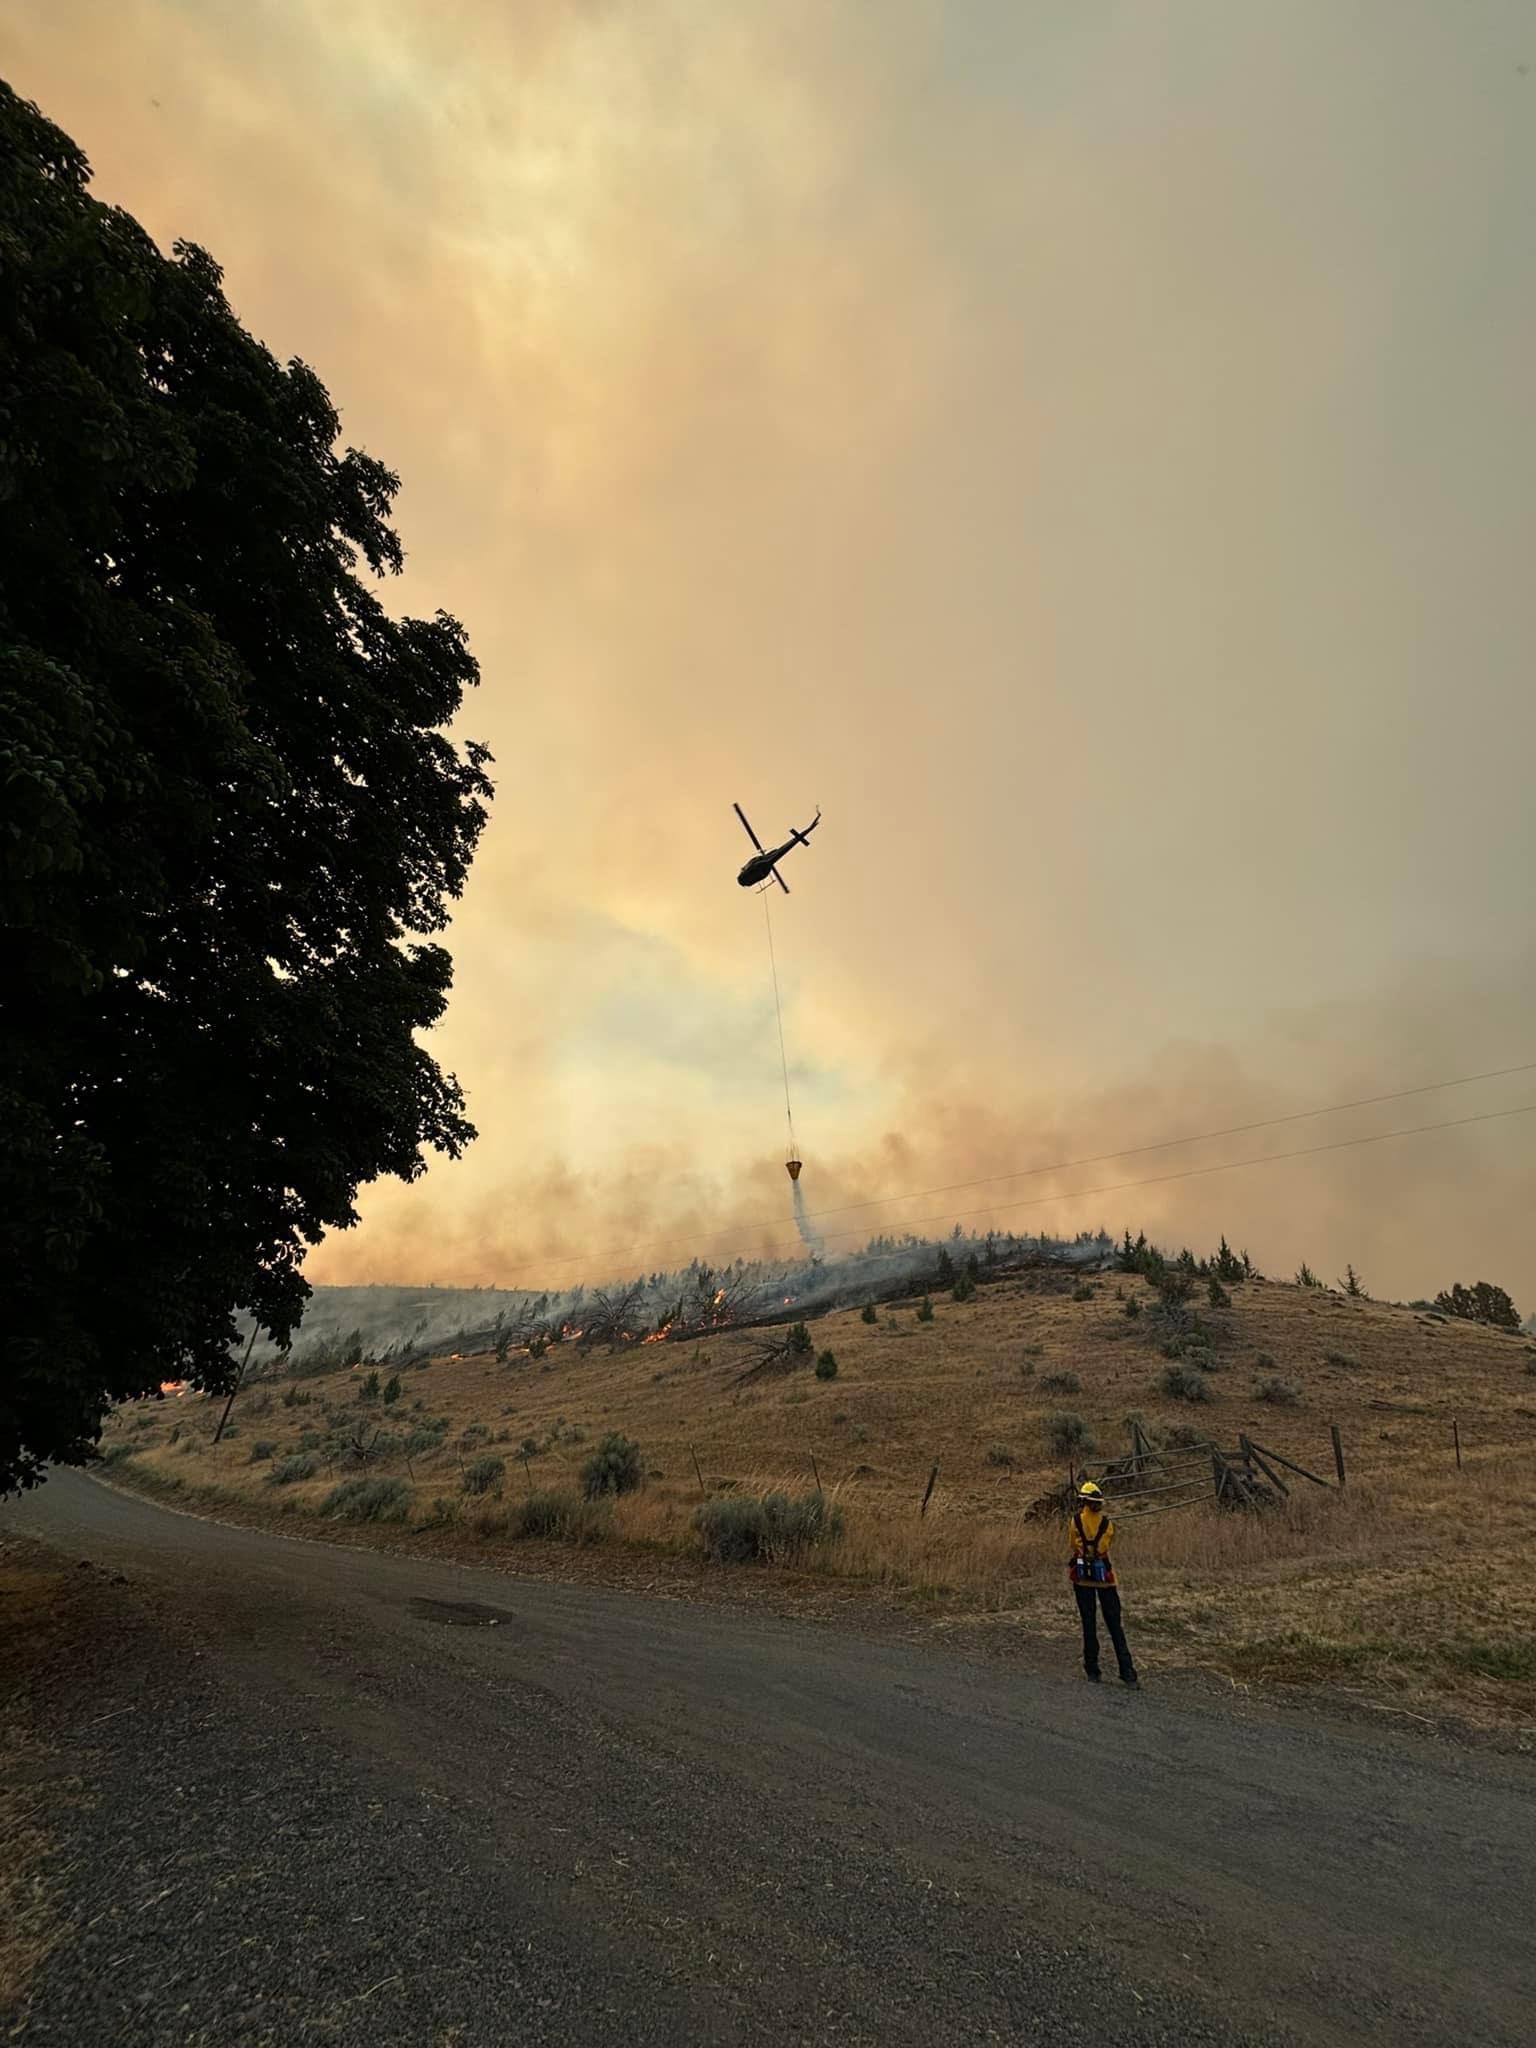 A helicopter drops water on the Lone Rock Fire with a firefighter standing on the roadside